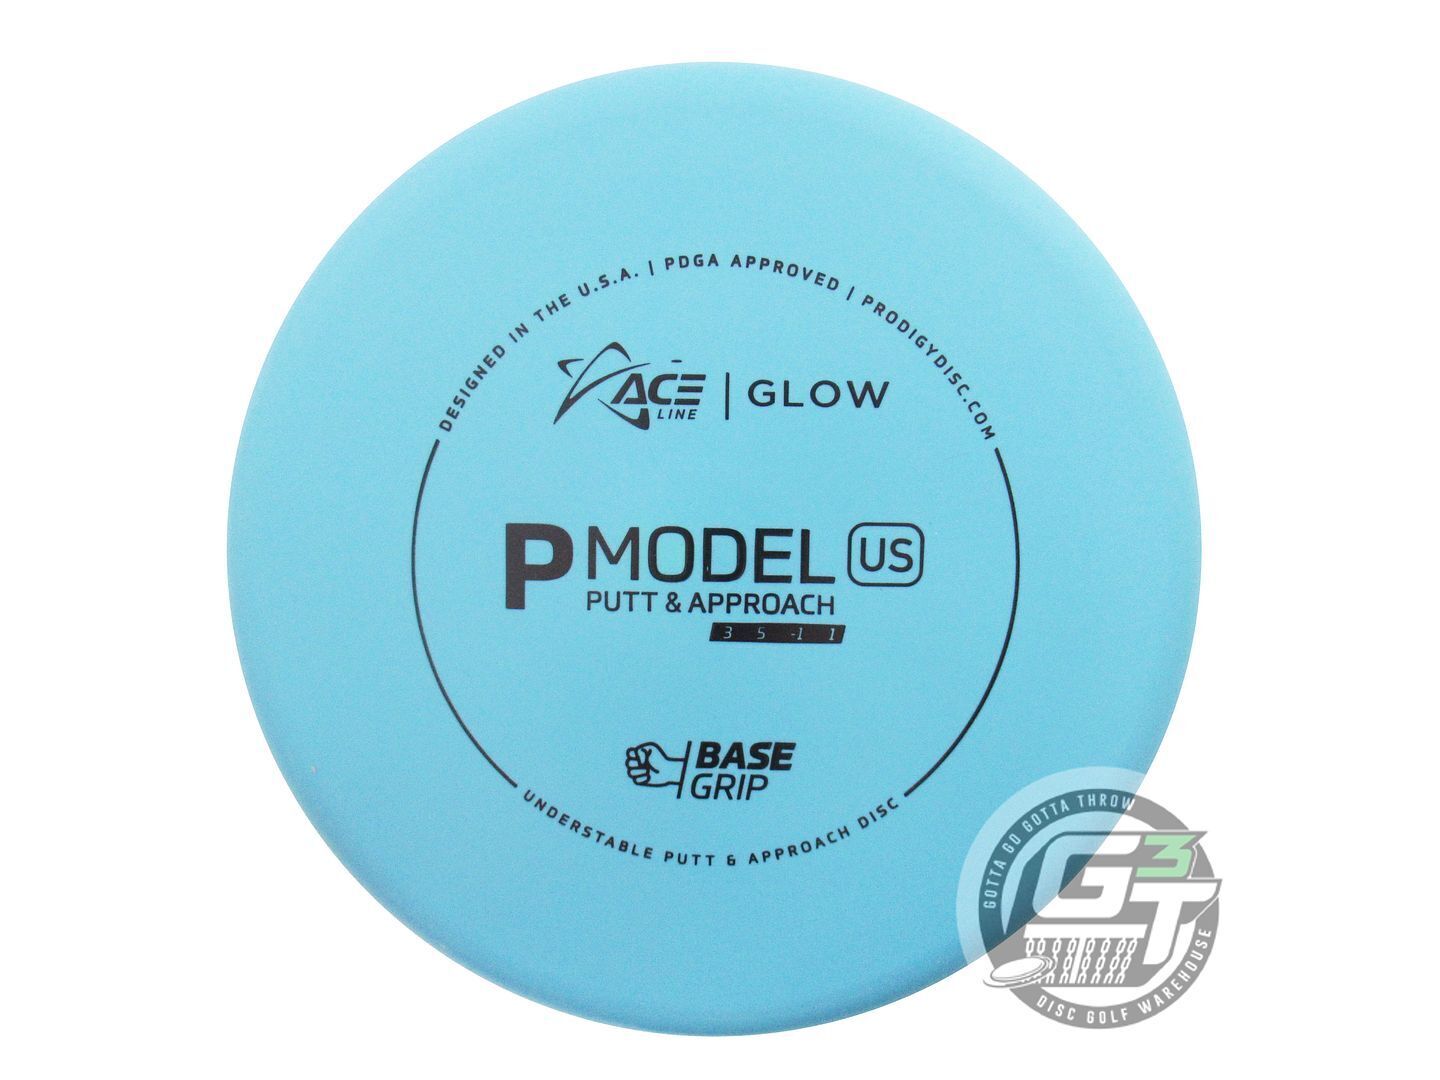 Prodigy Ace Line Glow Base Grip P Model US Putter Golf Disc (Individually Listed)